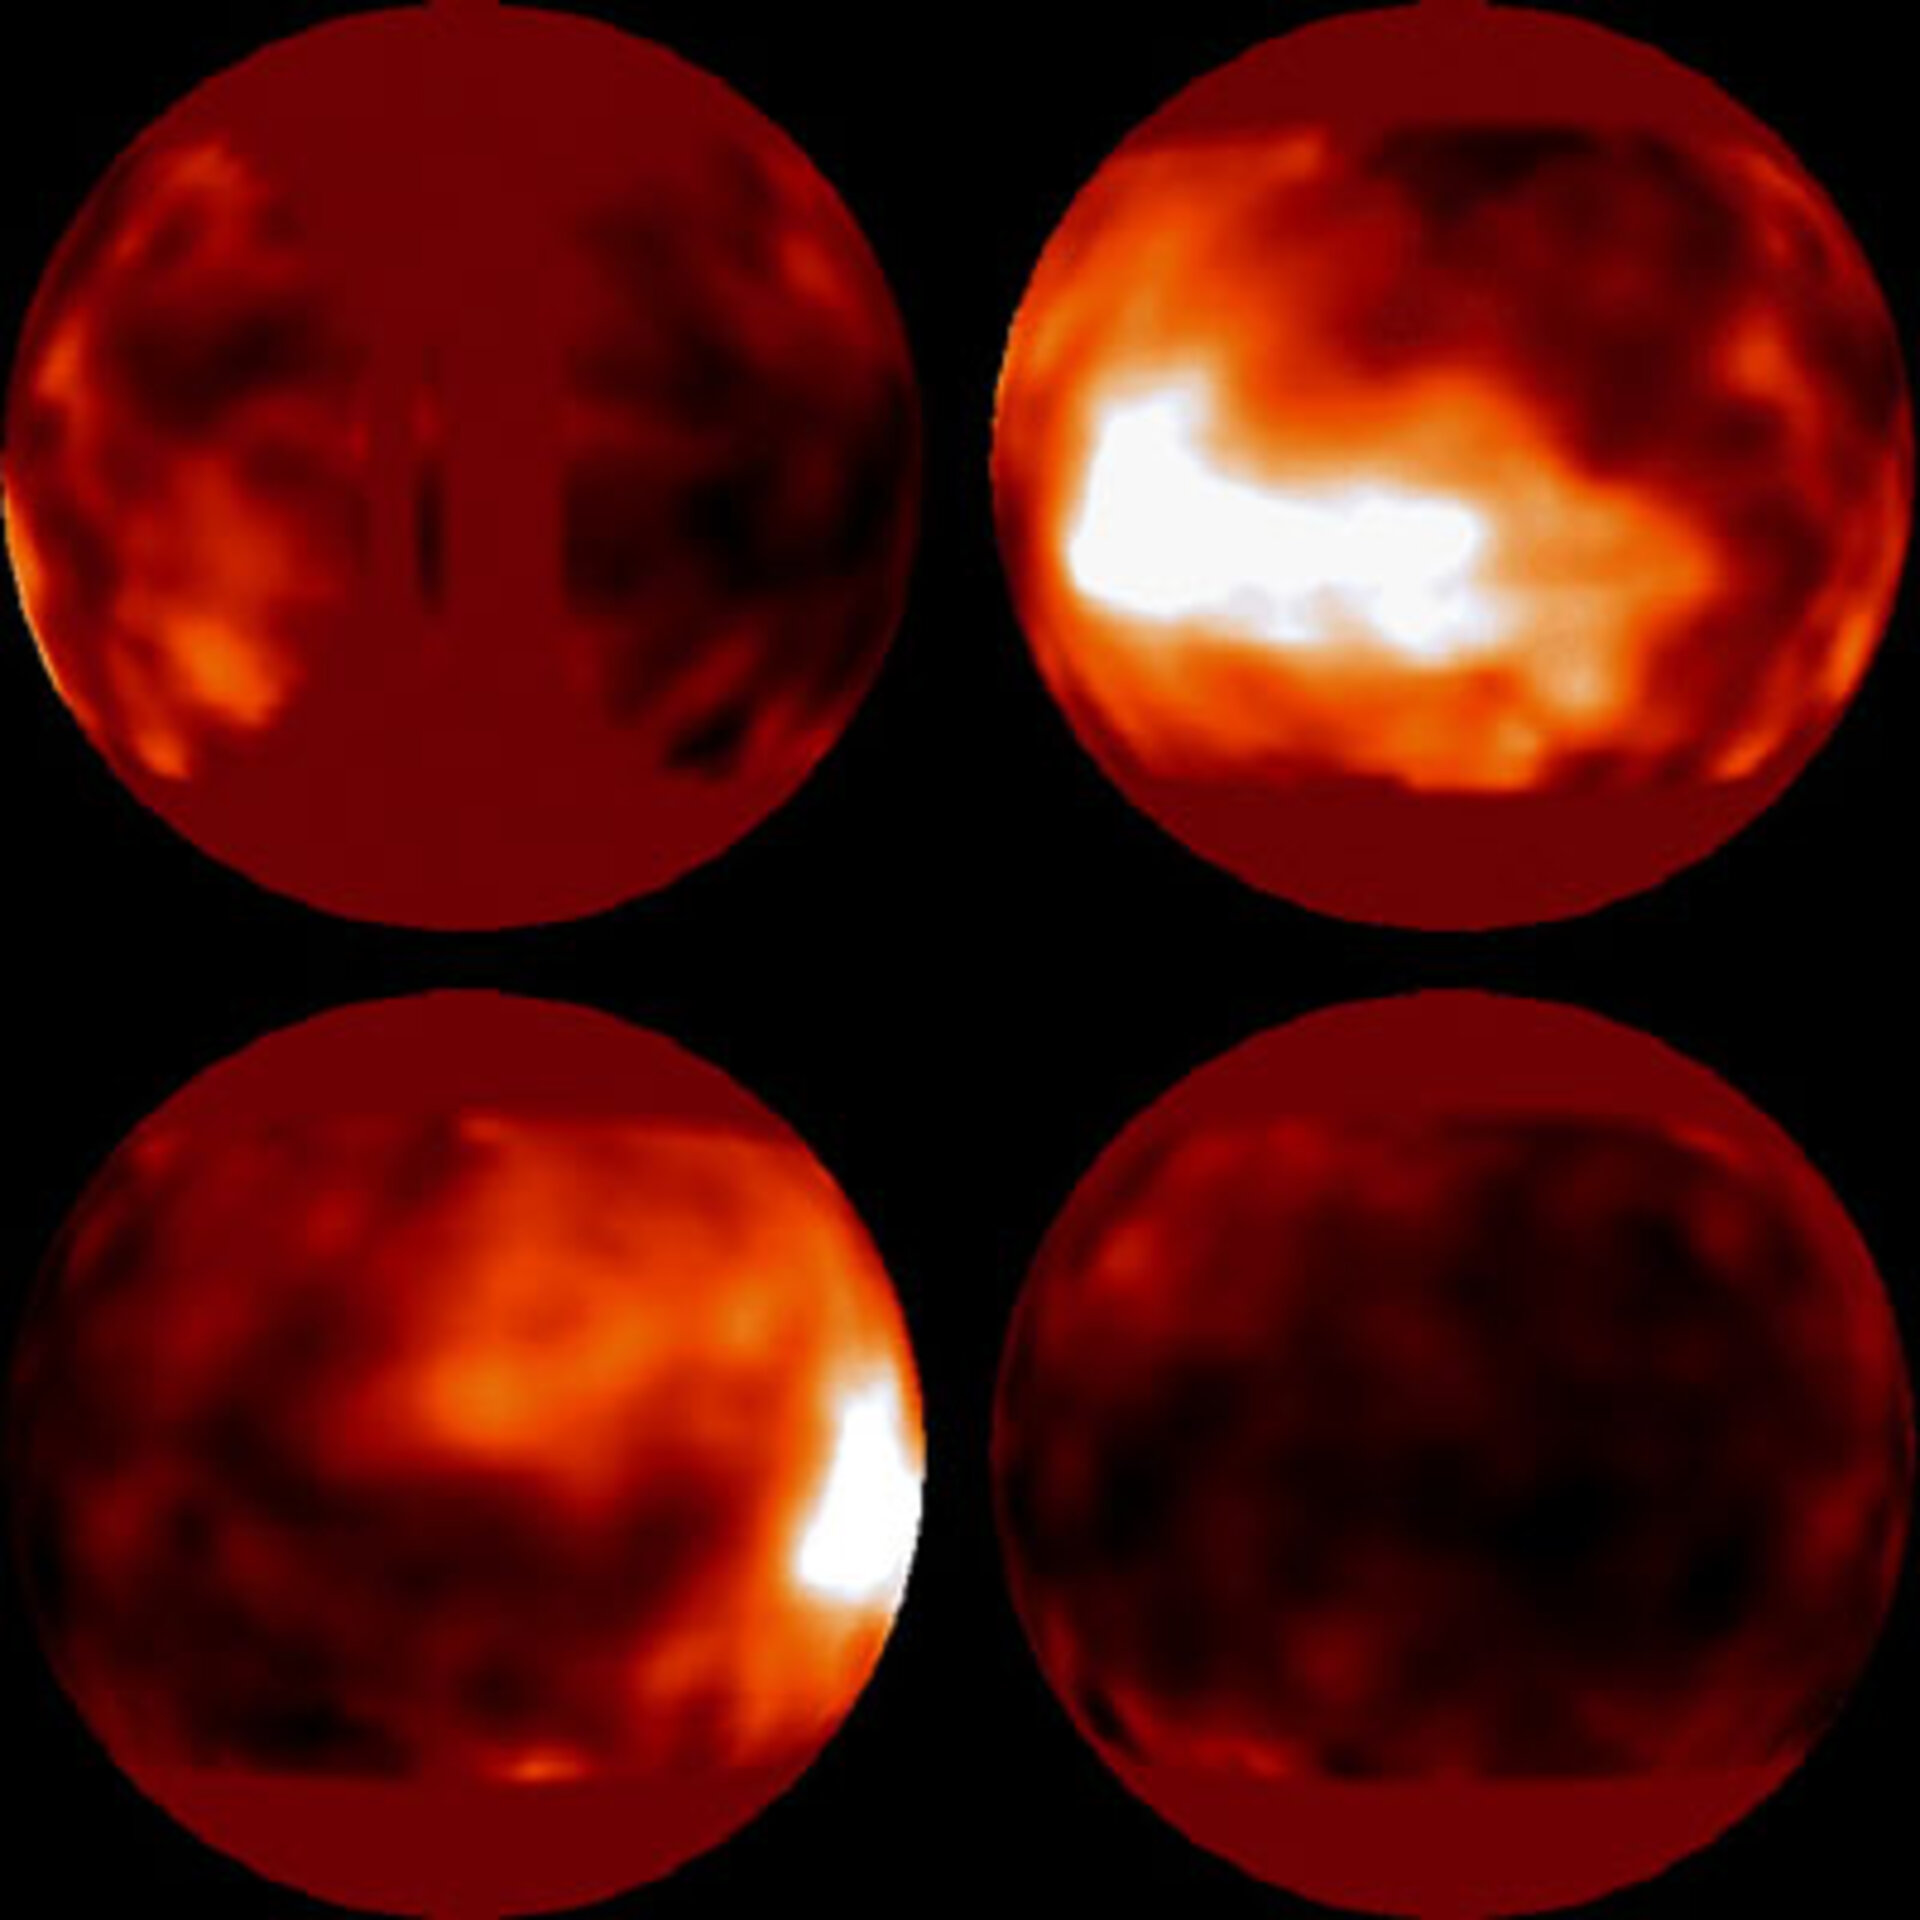 HST images of Titan's surface